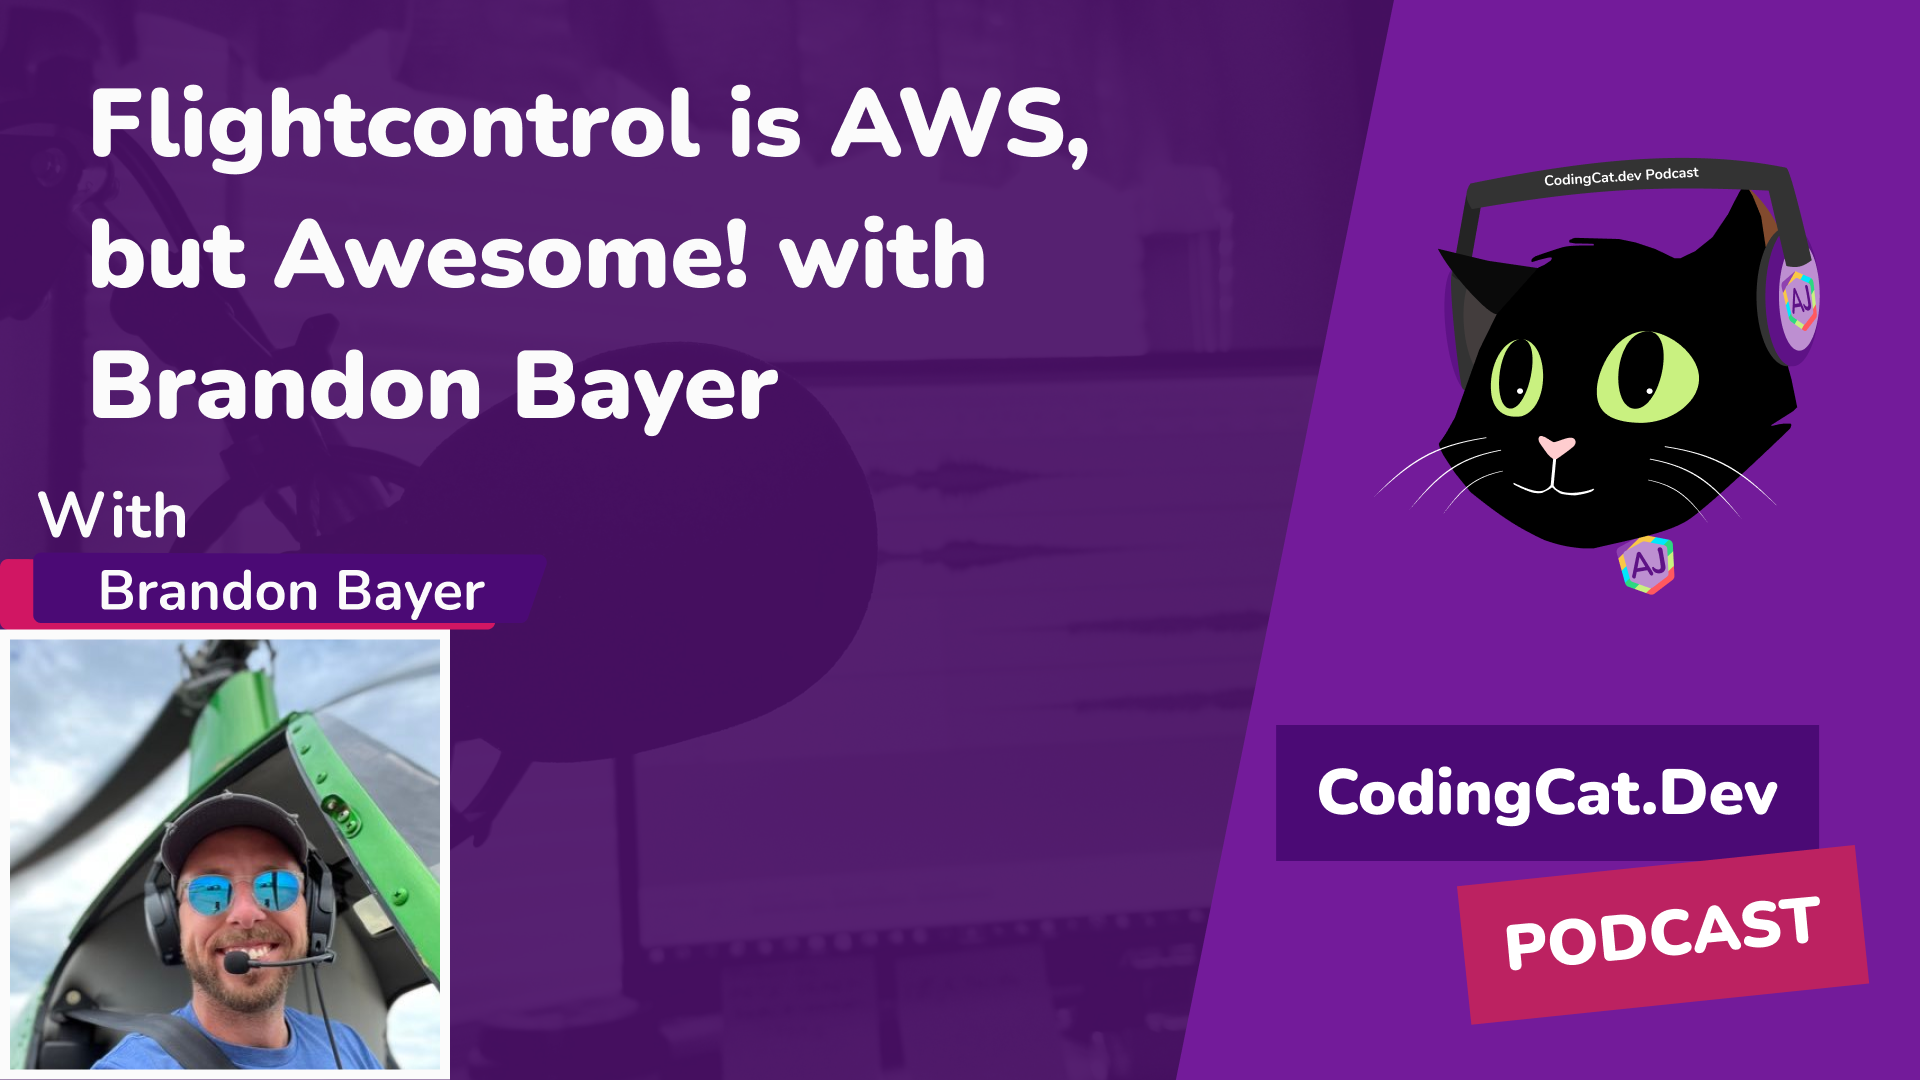 Flightcontrol is AWS, but Awesome! with Brandon Bayer